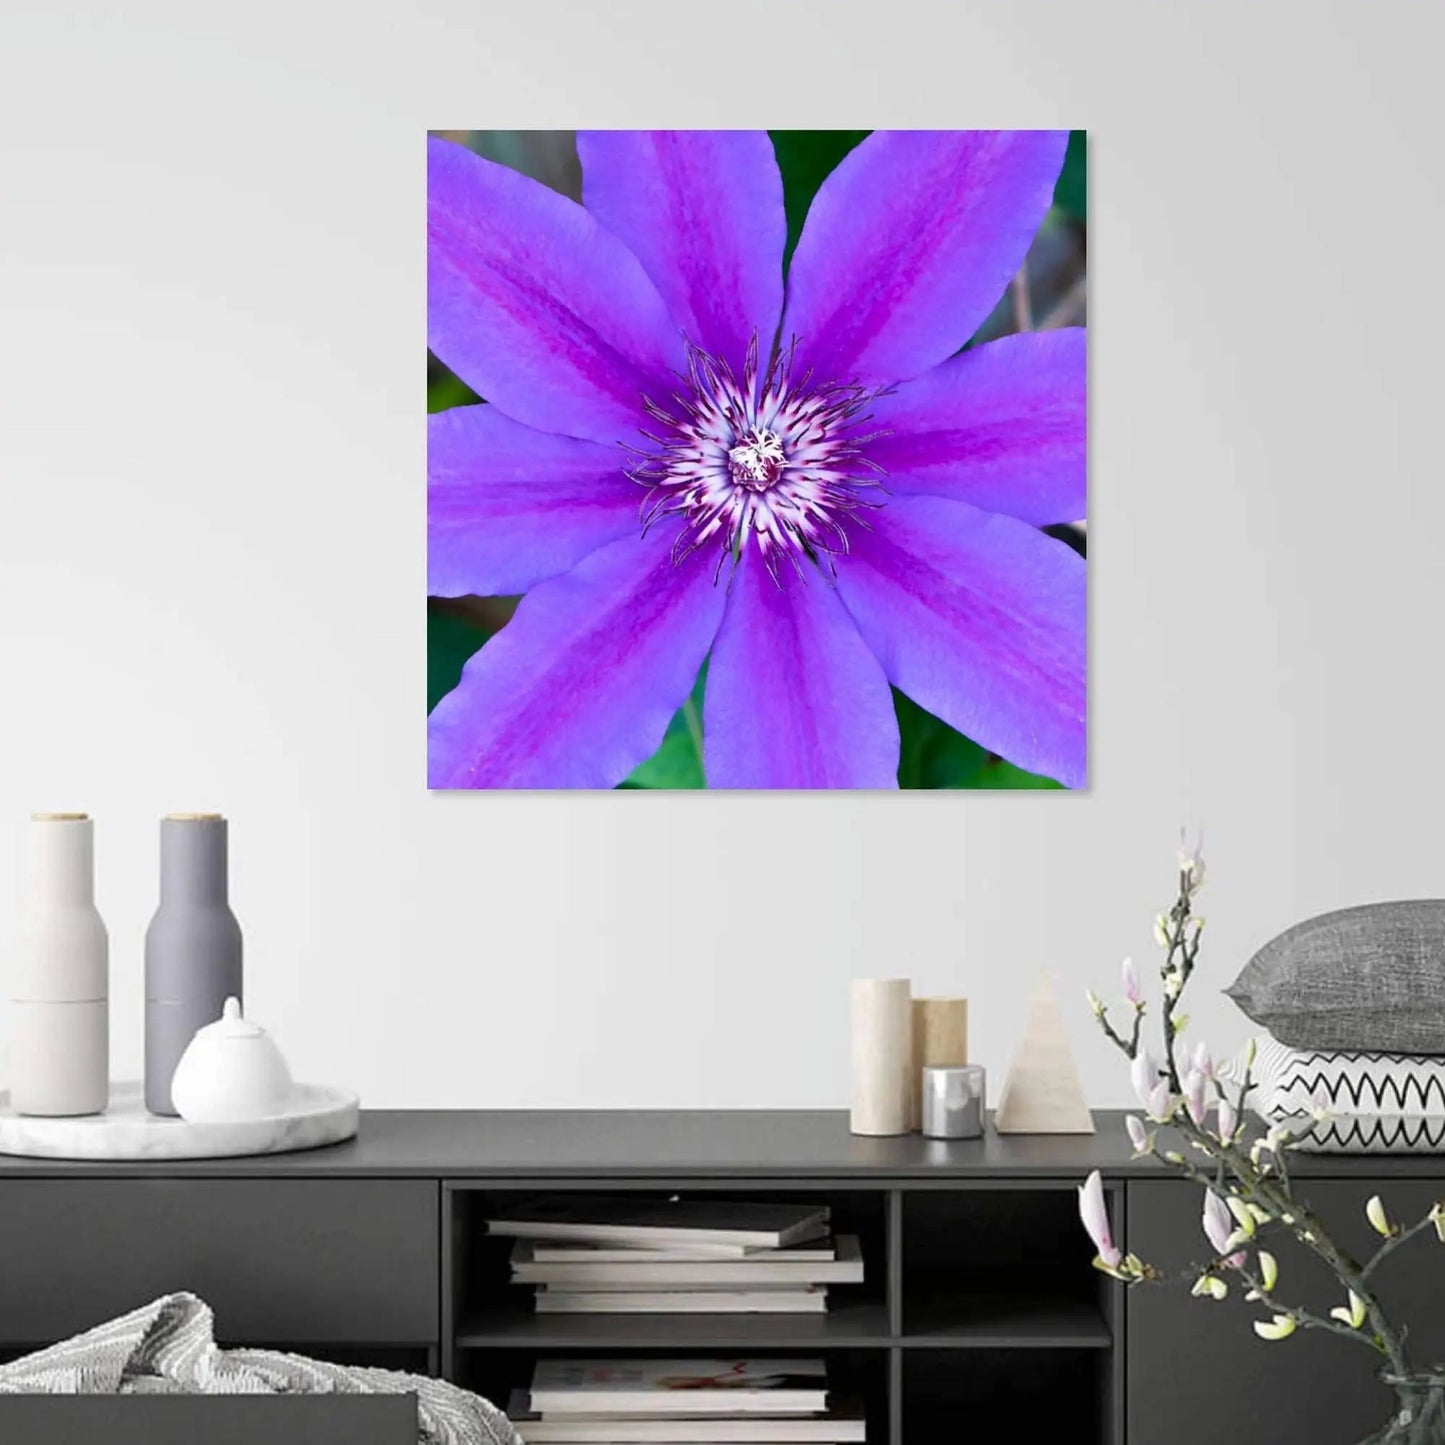 Purple clematis flower art hanging above a grey cabinet on a white wall